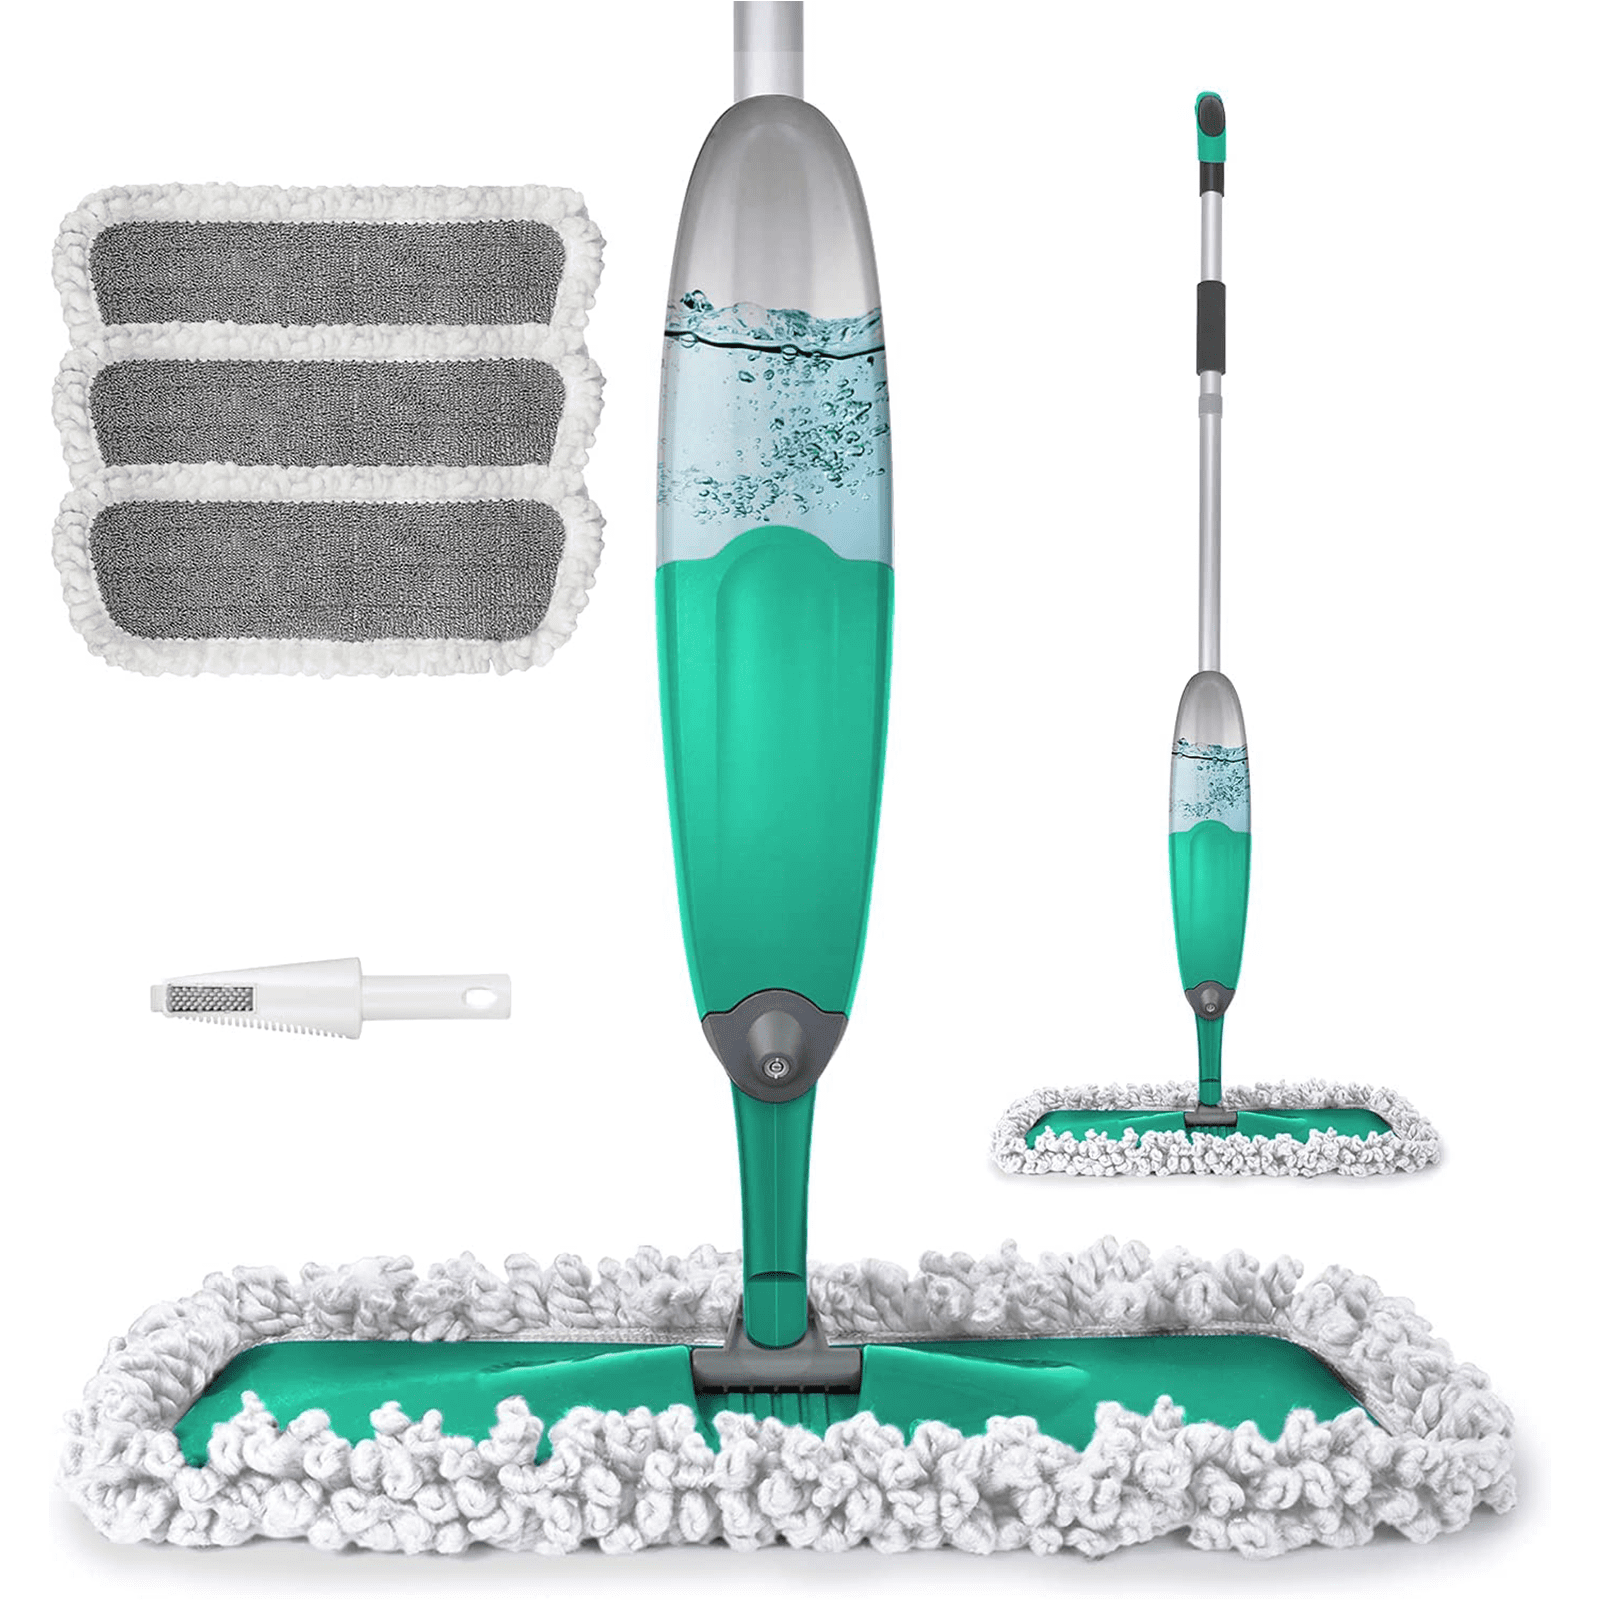 Bcooss Spray Mops for Floors Cleaning Microfiber Dry Wet Mop 360 Degree Spin Dust Mop with 3 Washable Mop Pads & 635ml Refillable Bottle, Green